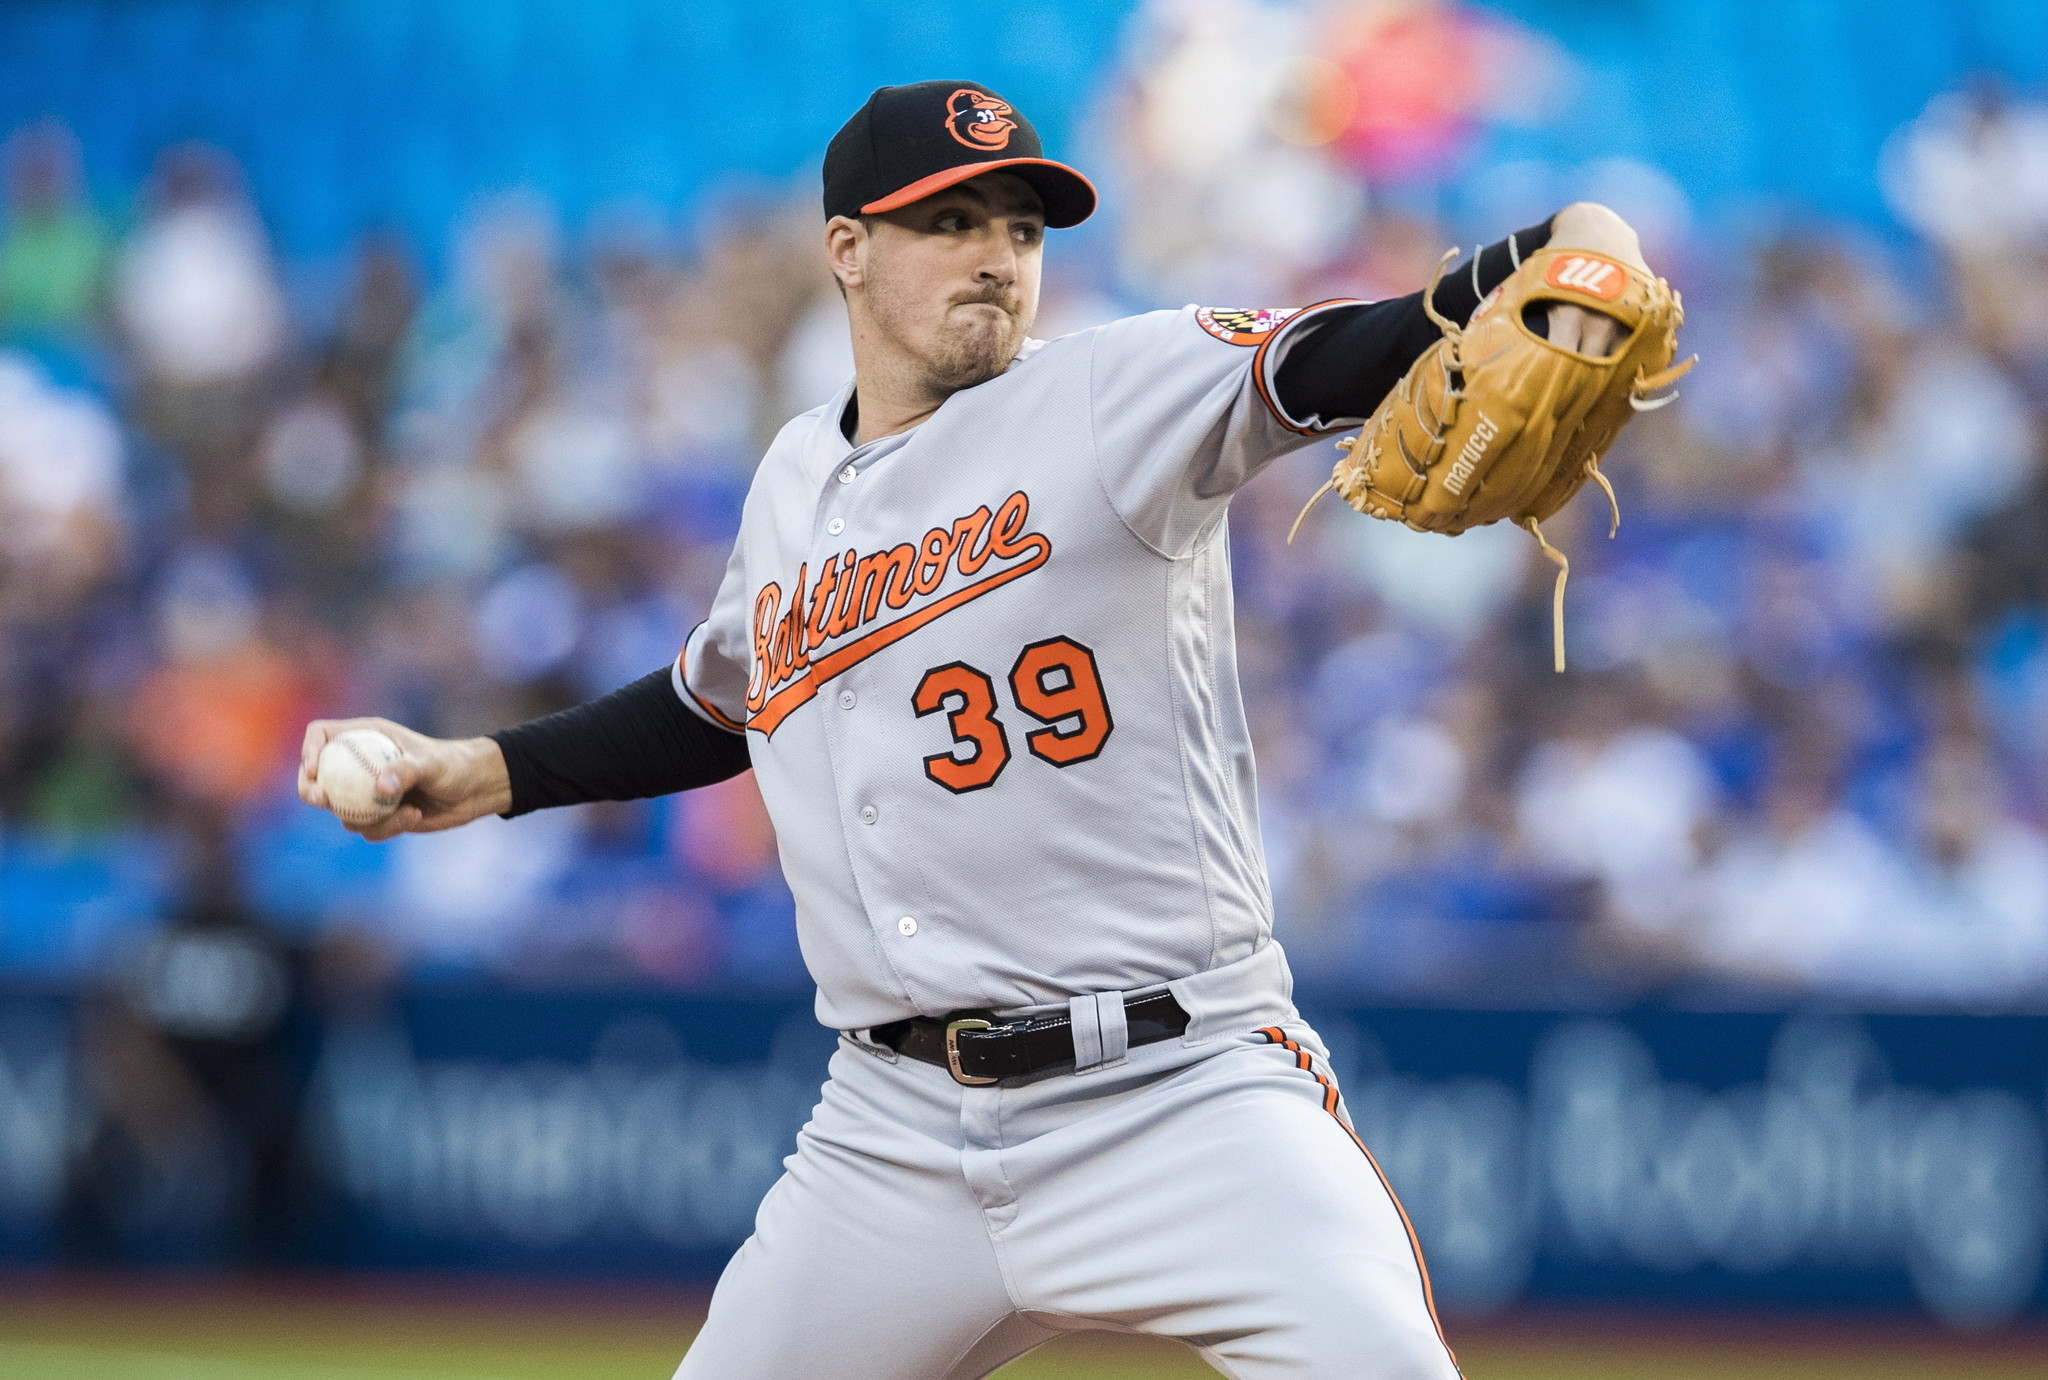 Orioles earn rare low-scoring victory as Gausman combines with bullpen to six-hit Blue Jays, 3-1